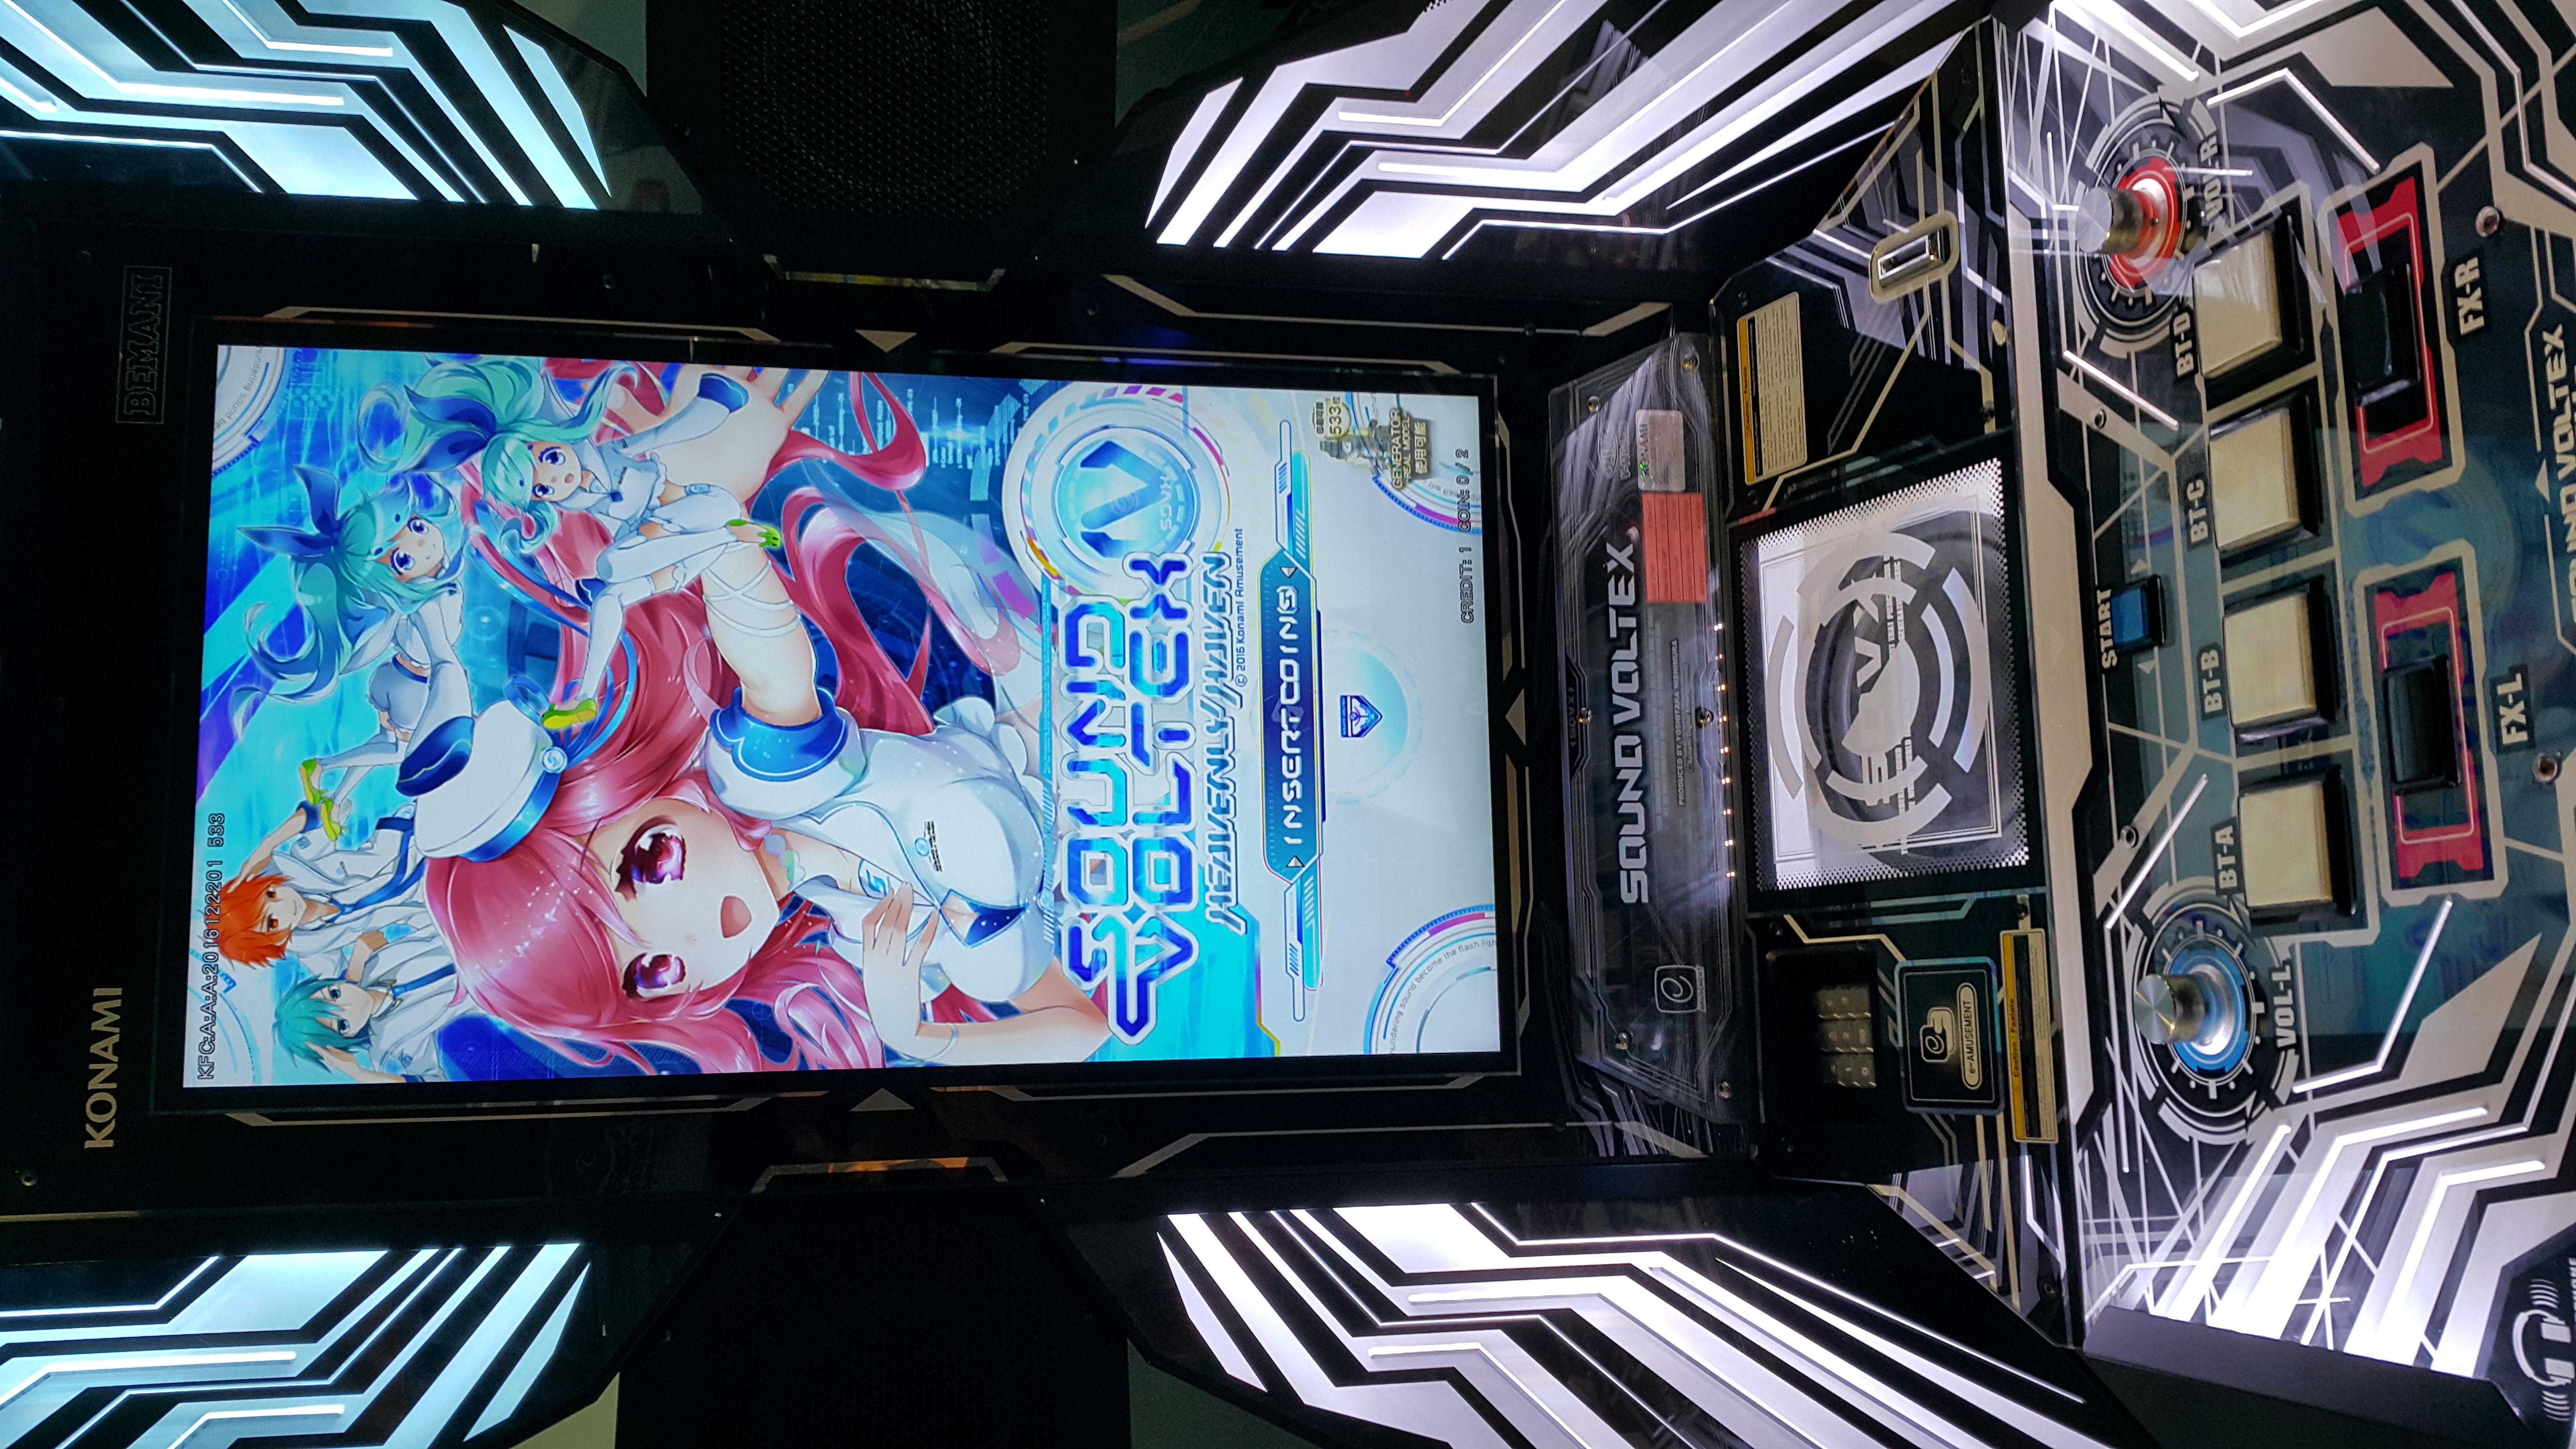 Image 3210 of 5694: Sound Voltex IV Heavenly Haven.